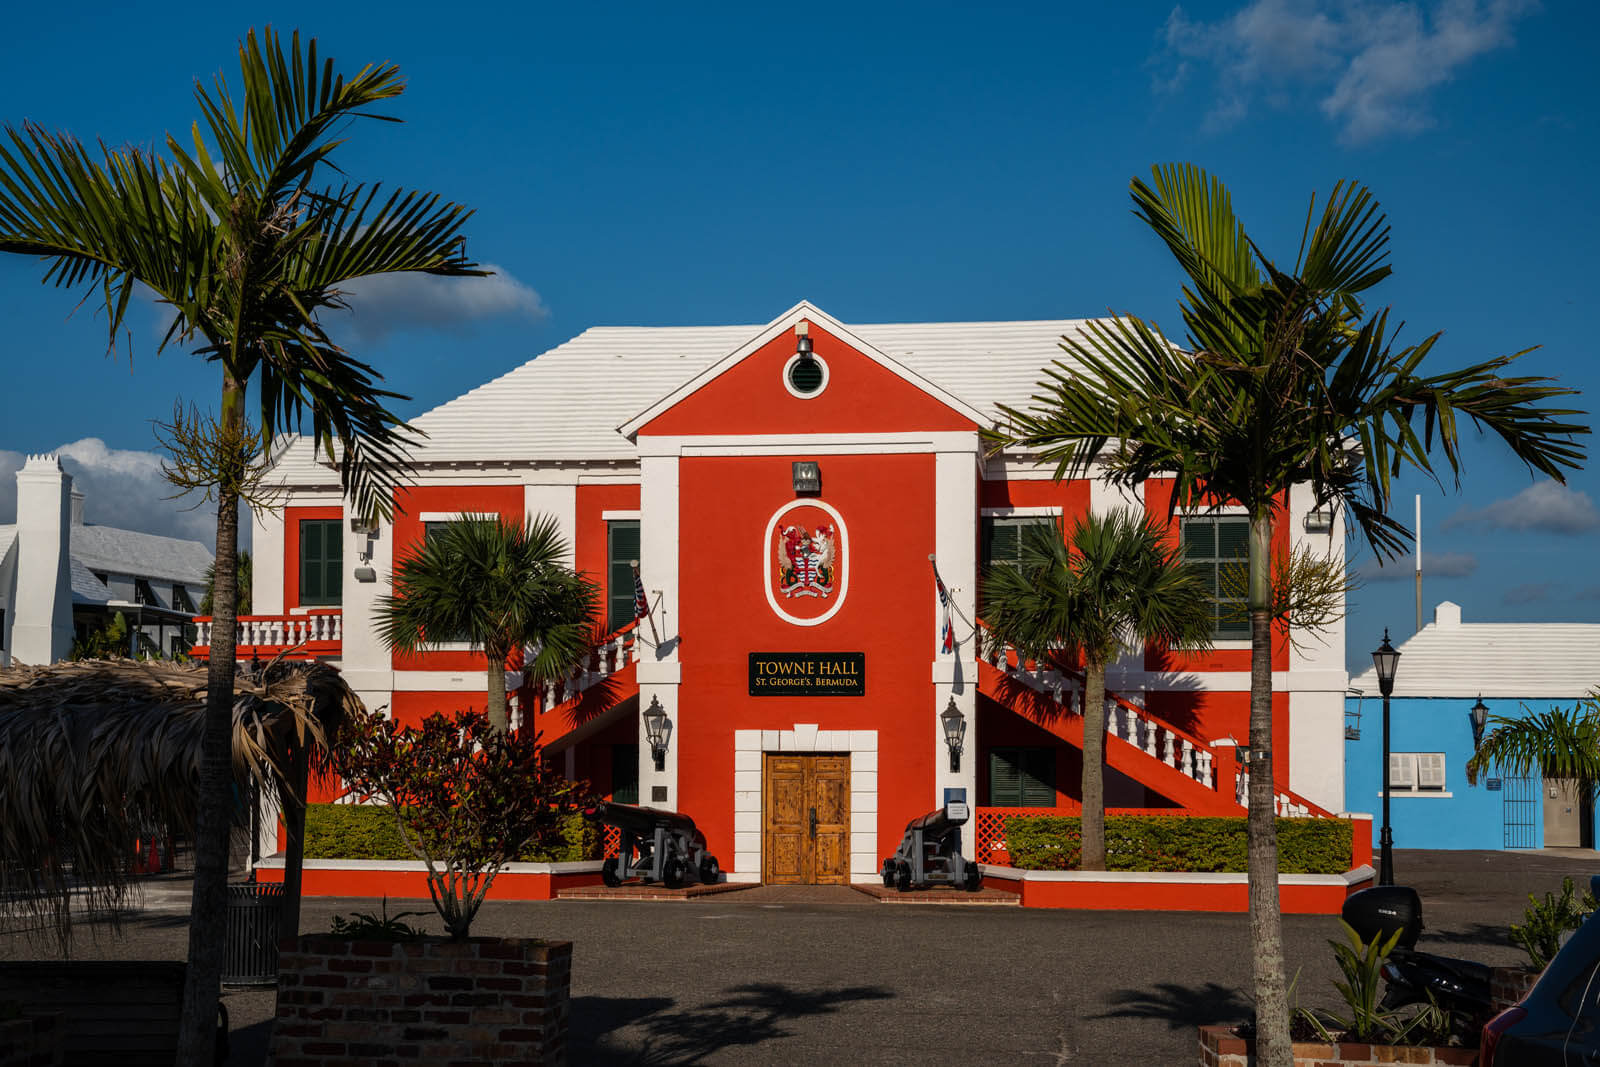 The King's Square at St Georges in Bermuda